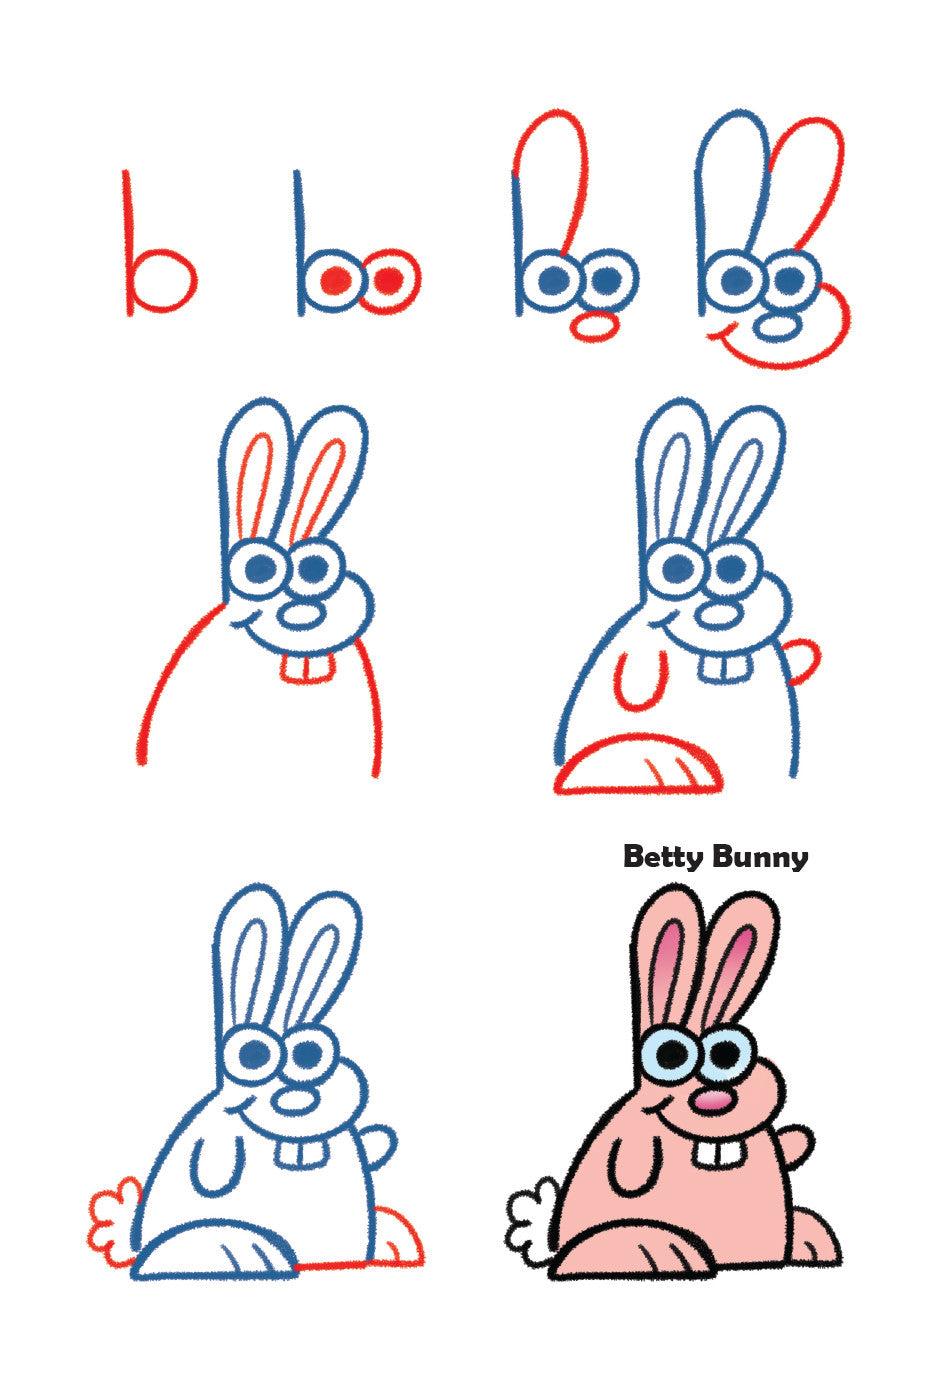 how to draw a cute baby animals